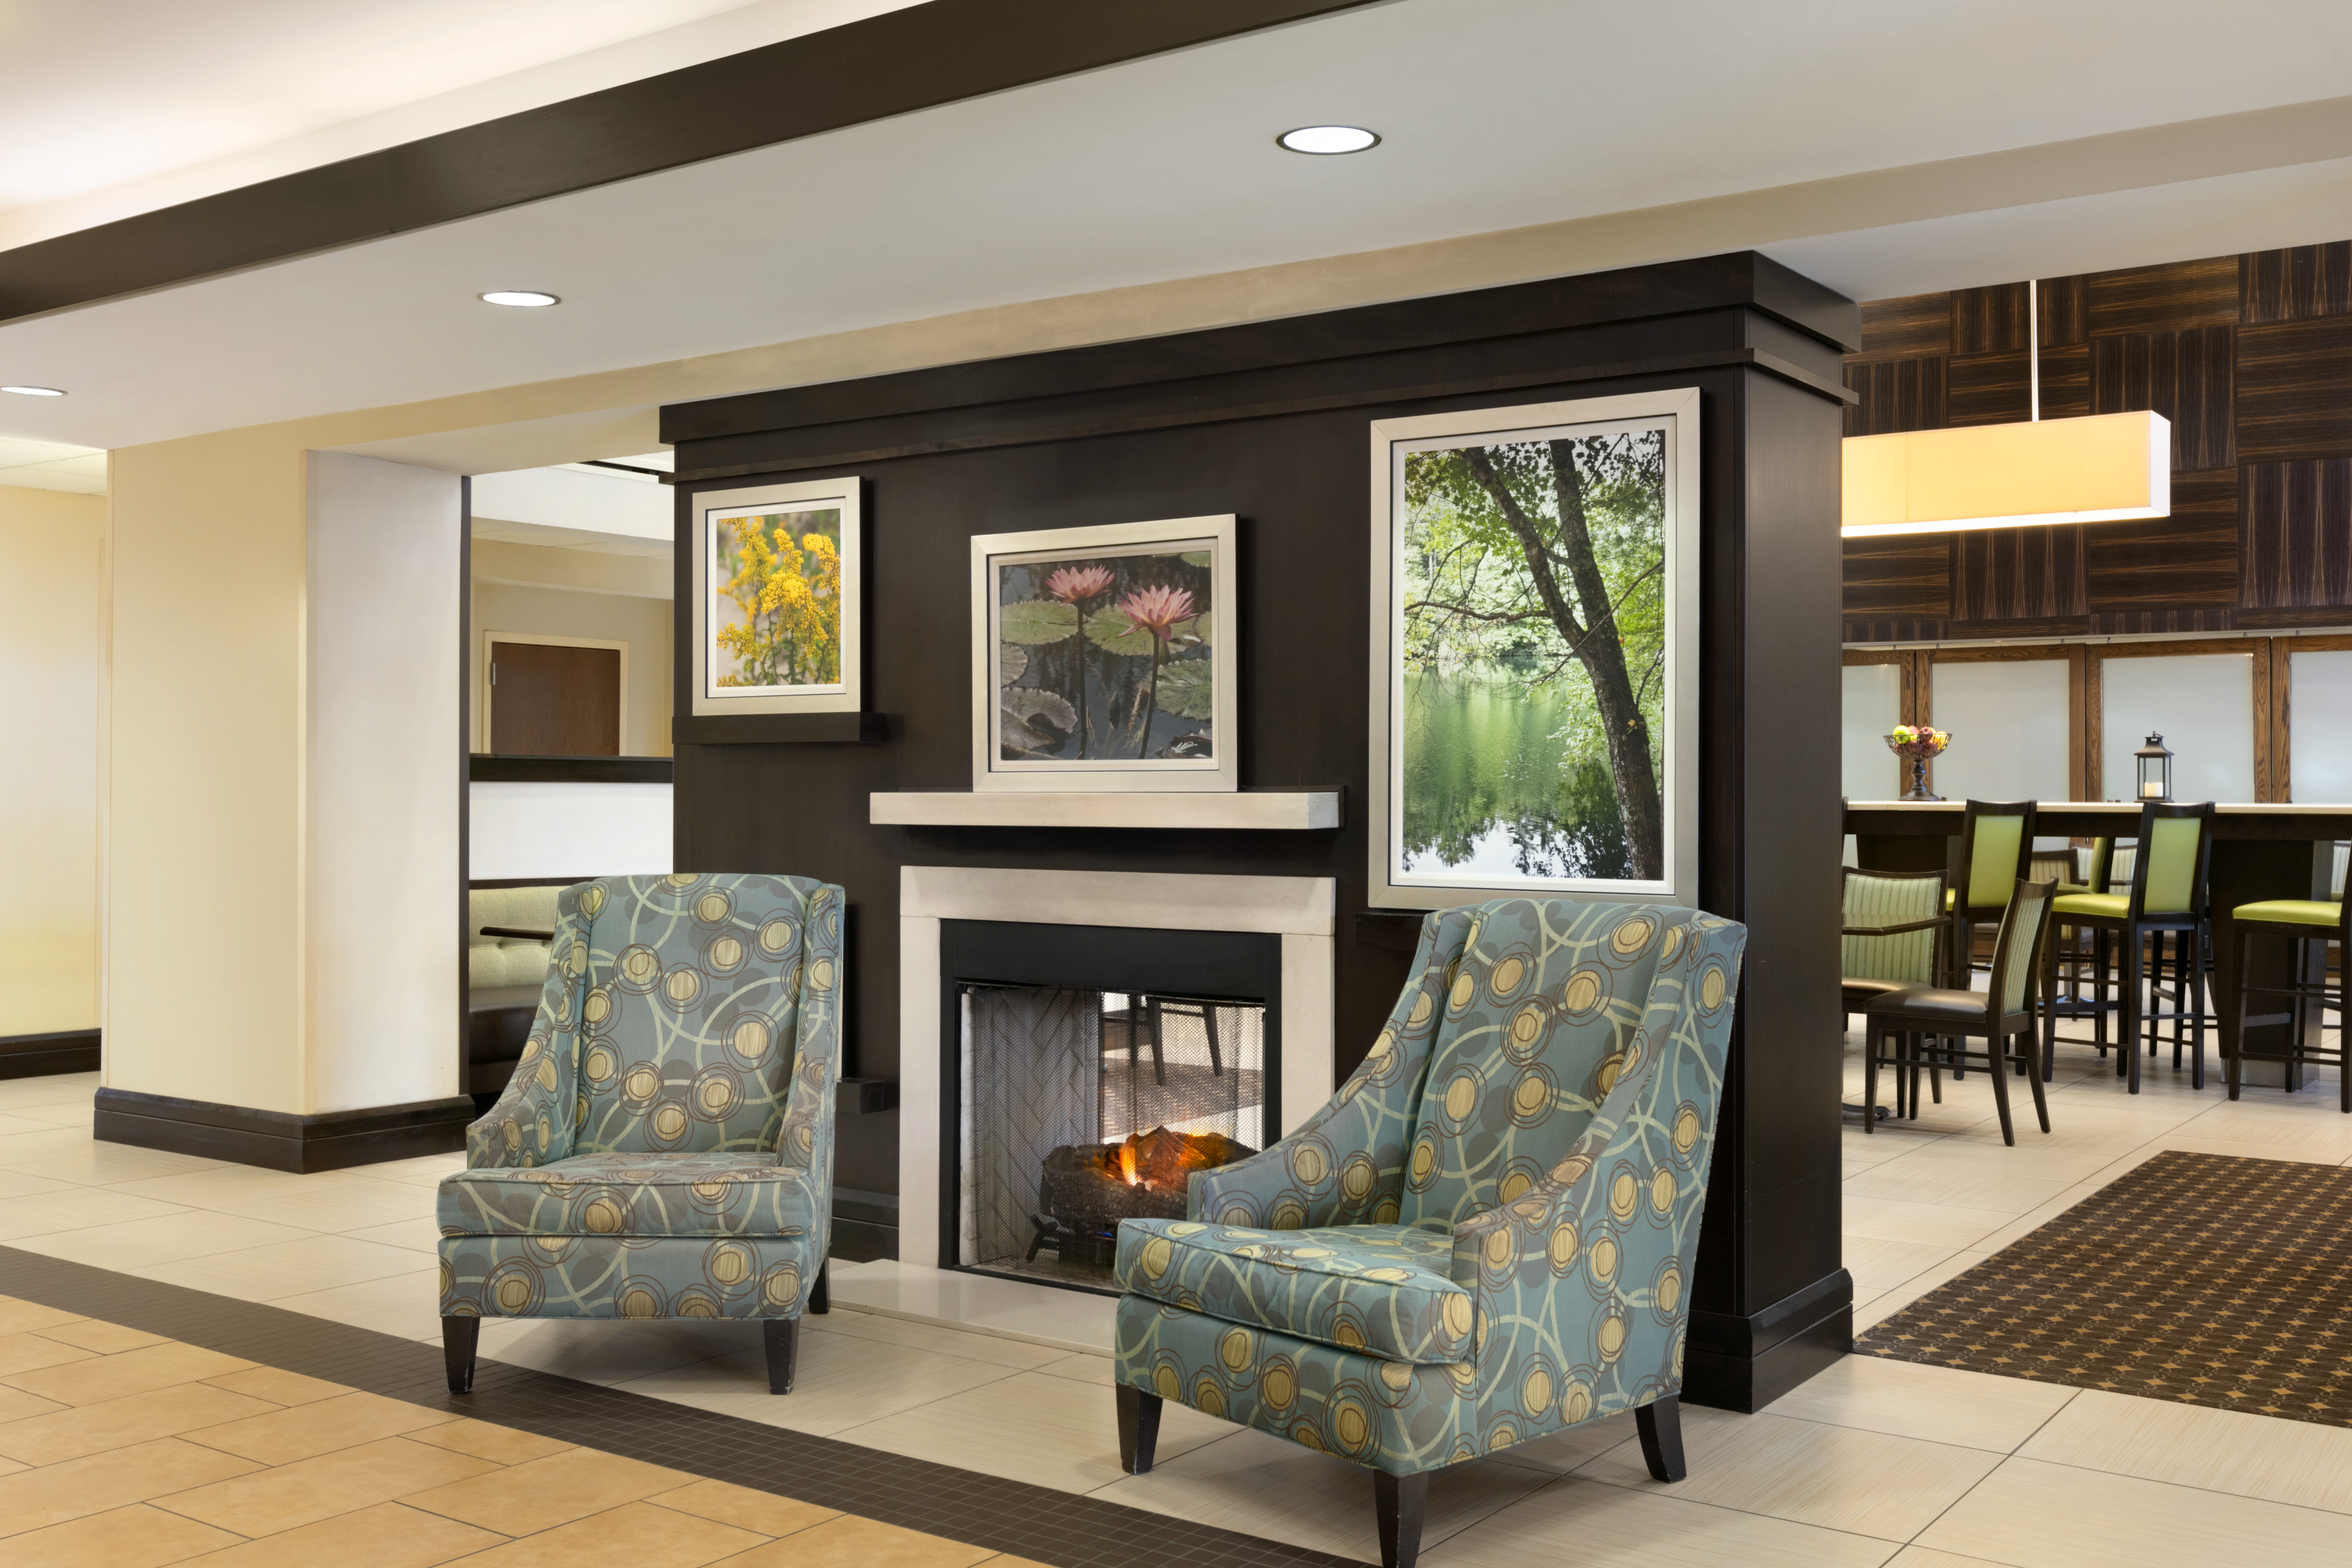 Lobby Seating Beside Fireplace